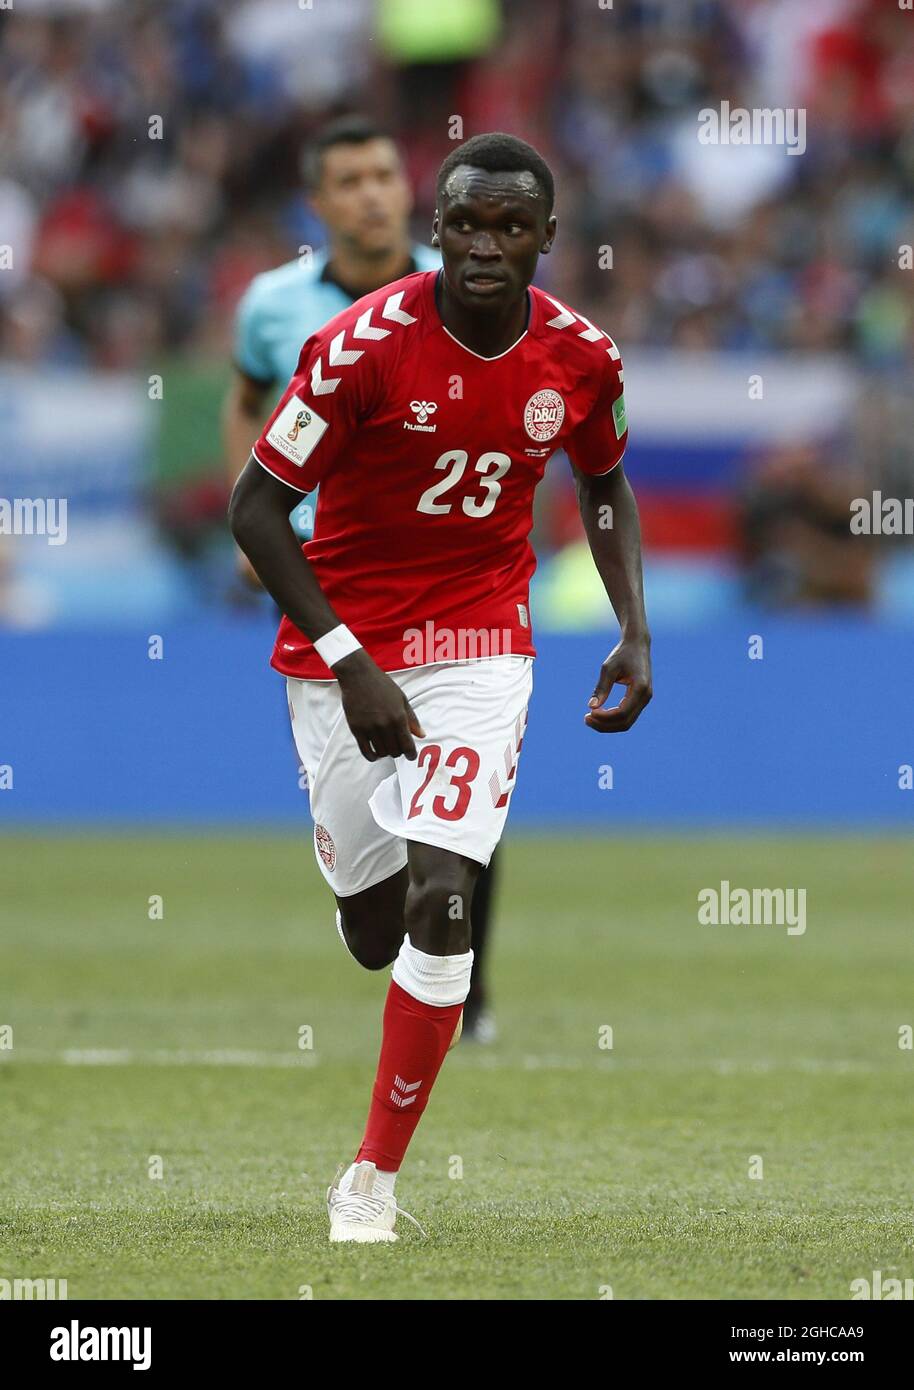 Denmark's Pione Sisto in action during the FIFA World Cup 2018 Group C match at the Luzhniki Stadium, Moscow. Picture date 26th June 2018. Picture credit should read: David Klein/Sportimage via PA Images Stock Photo